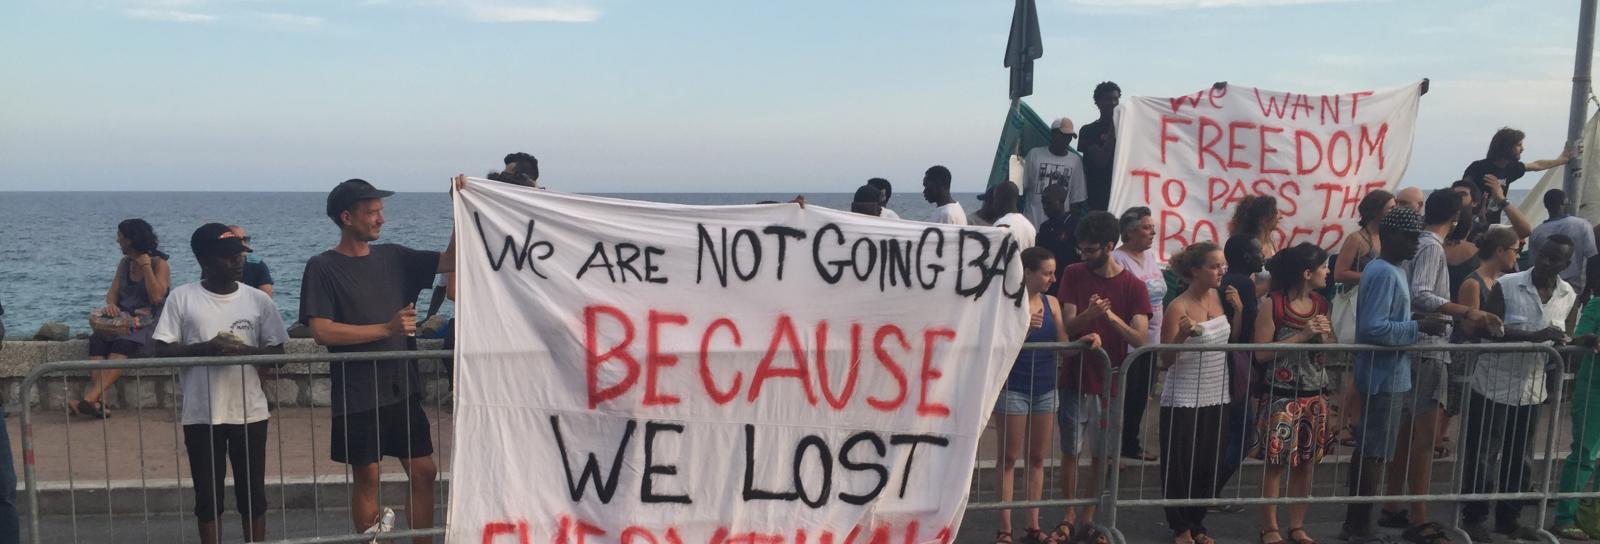 Eritrean refugees in Italy protest with sign: We are not going back because we lost everything